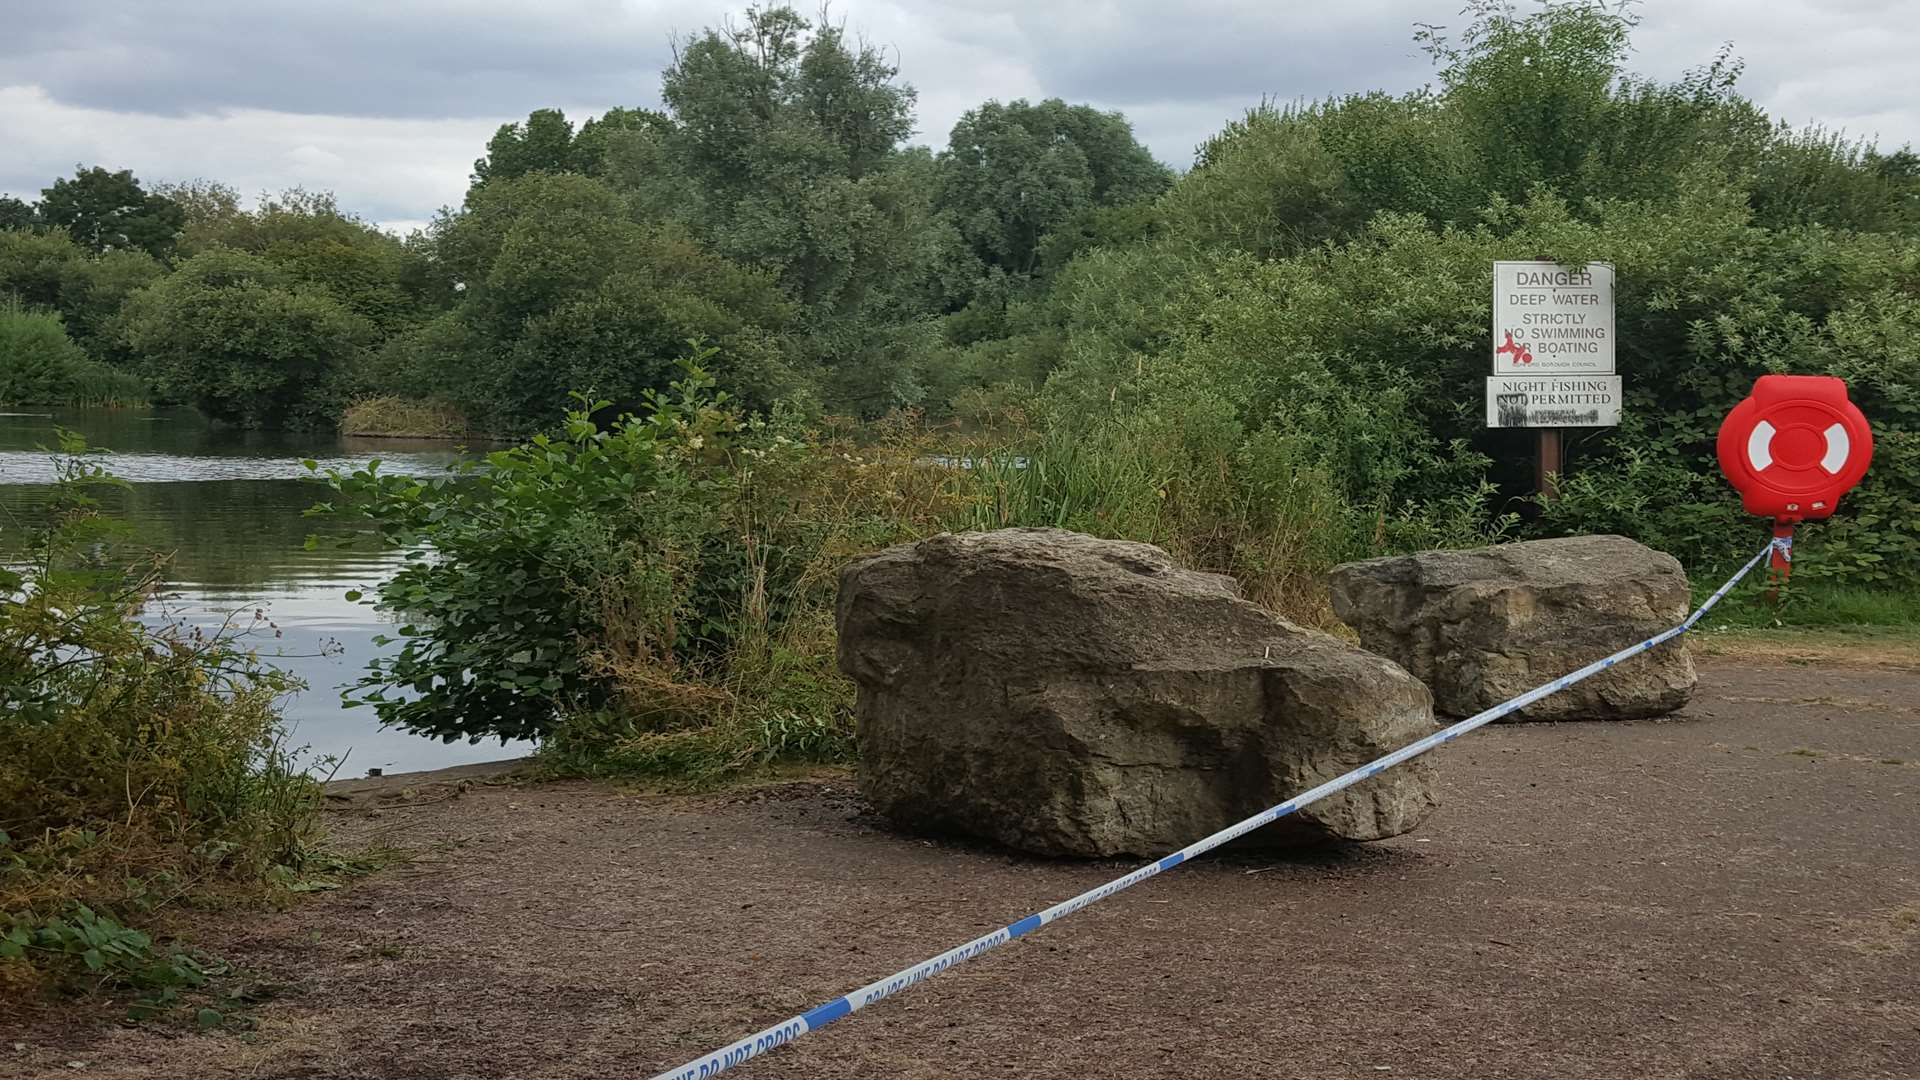 An area of the lake has been cordoned off